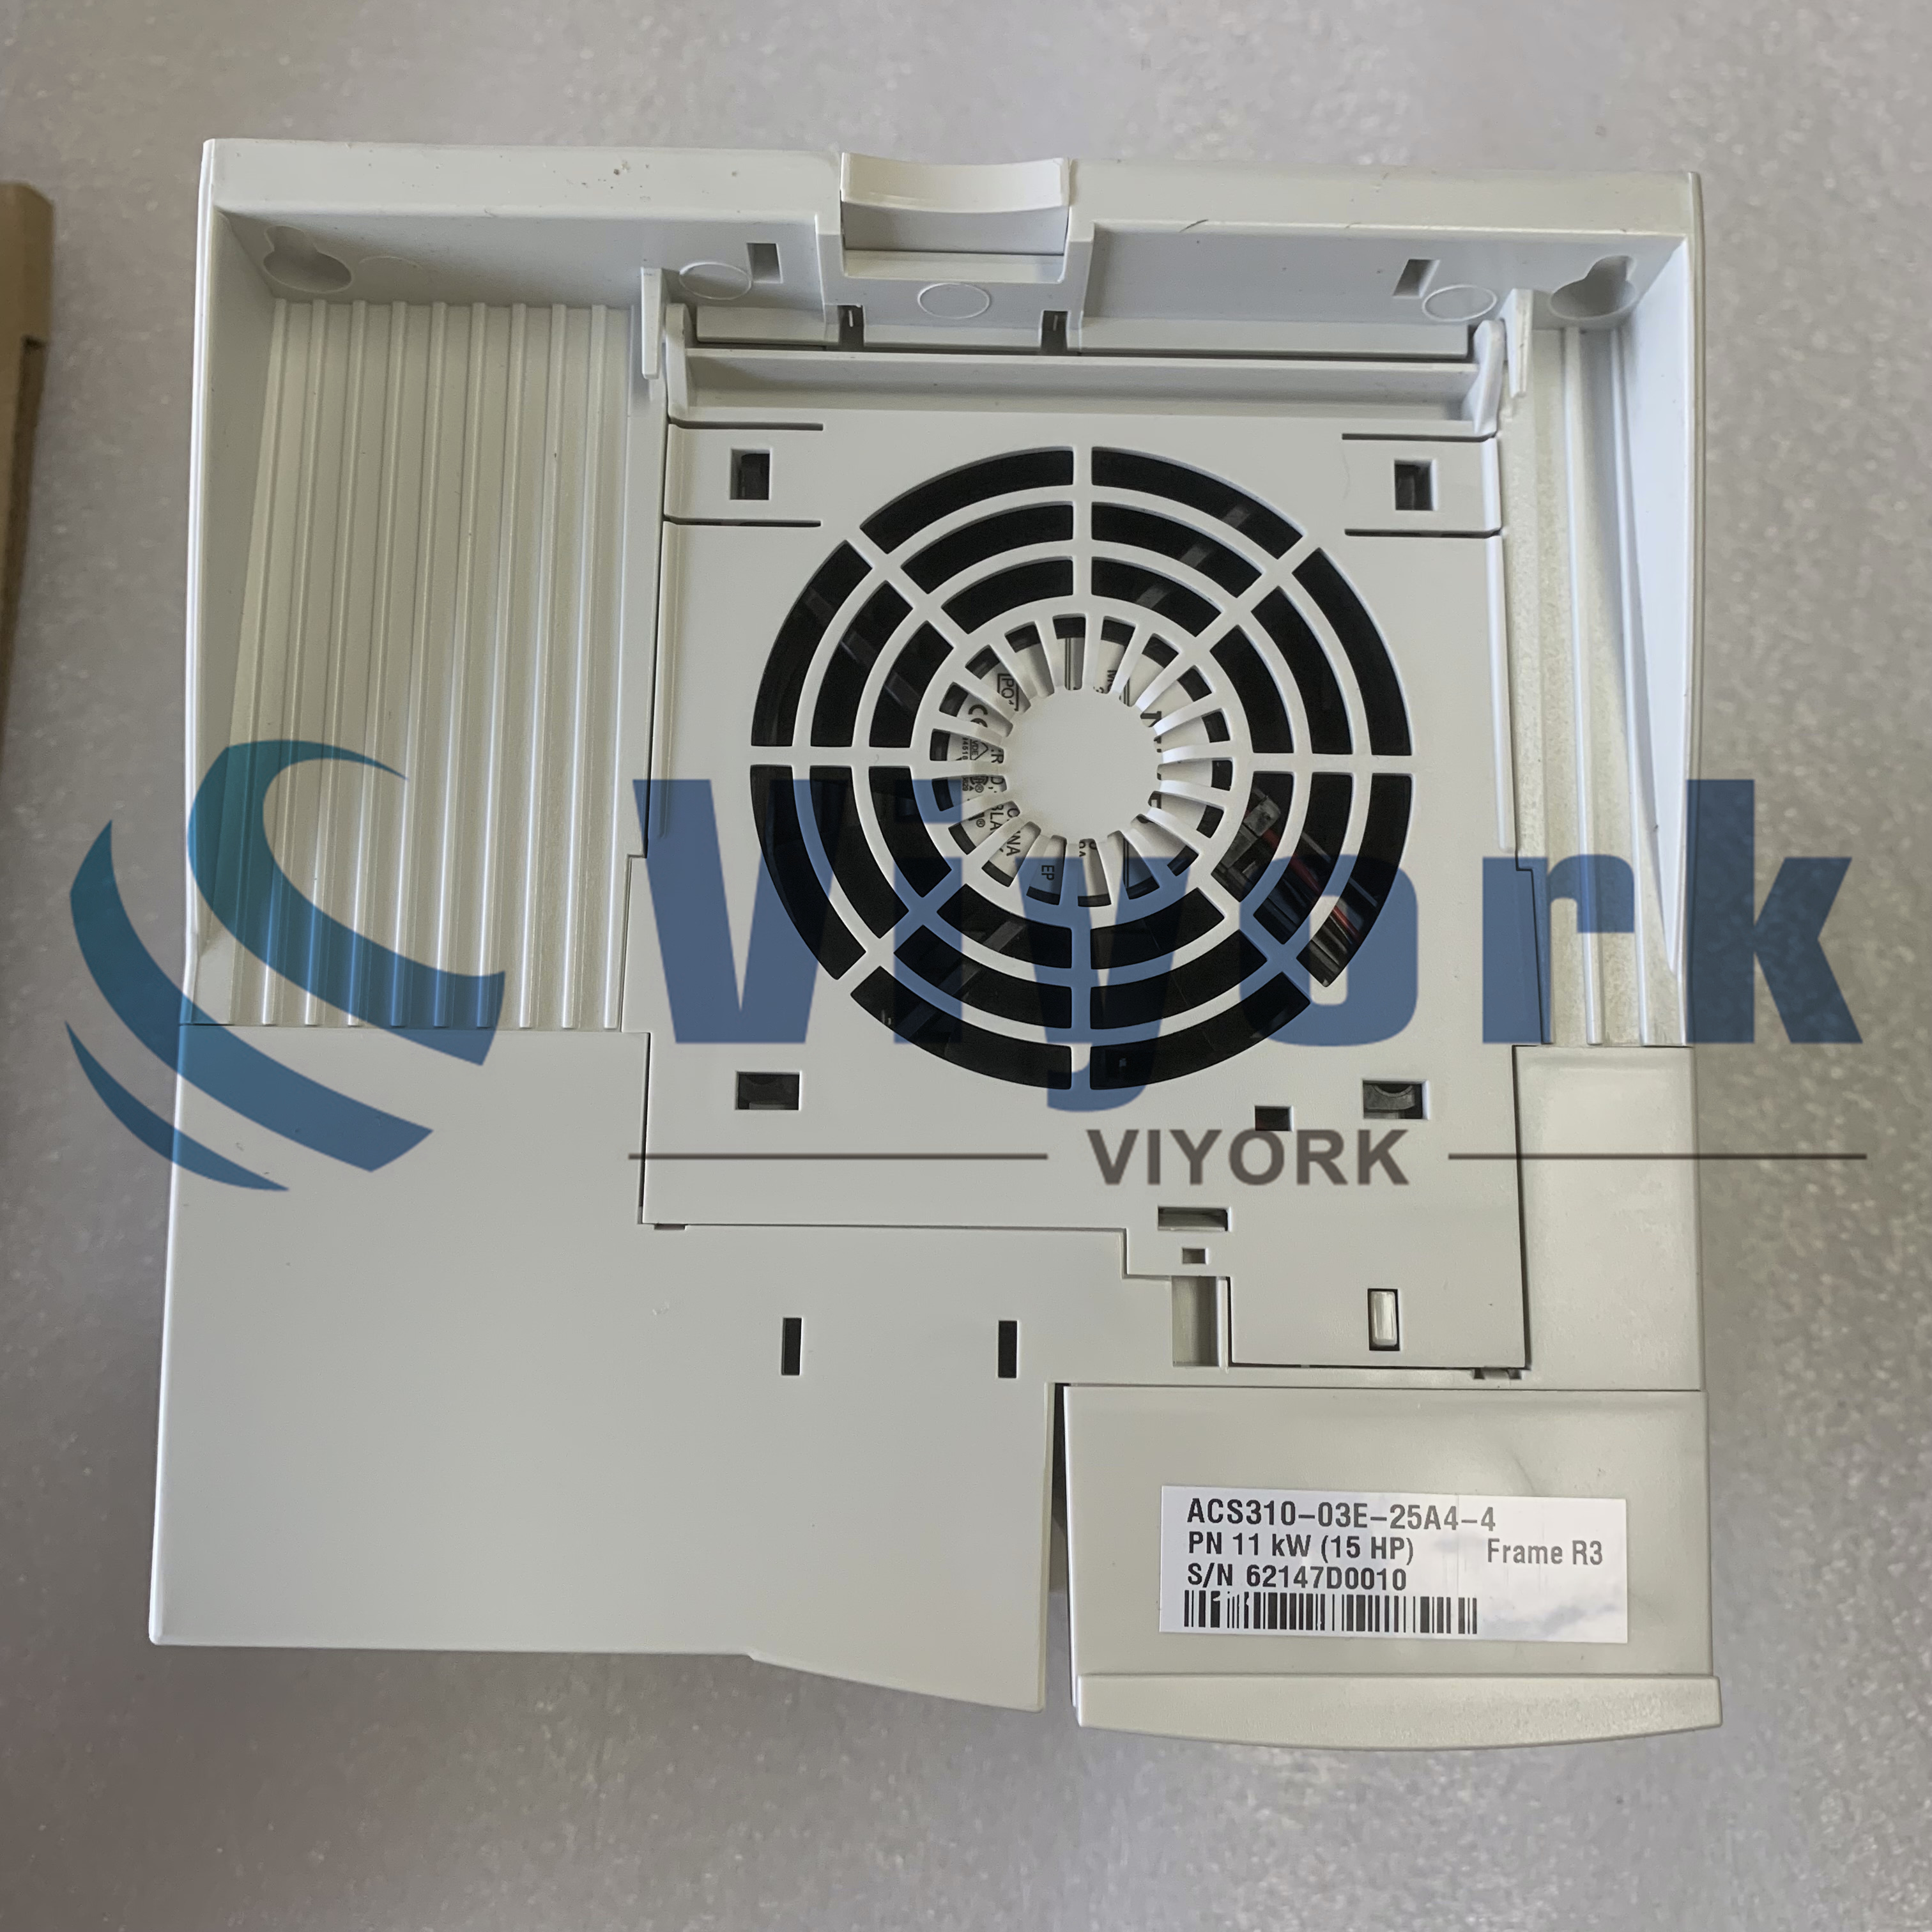 ABB ACS310-03E-25A4-4 DRIVE ACS310 SERIES 3 PHASE EMC FILTER CONNECTED NEW